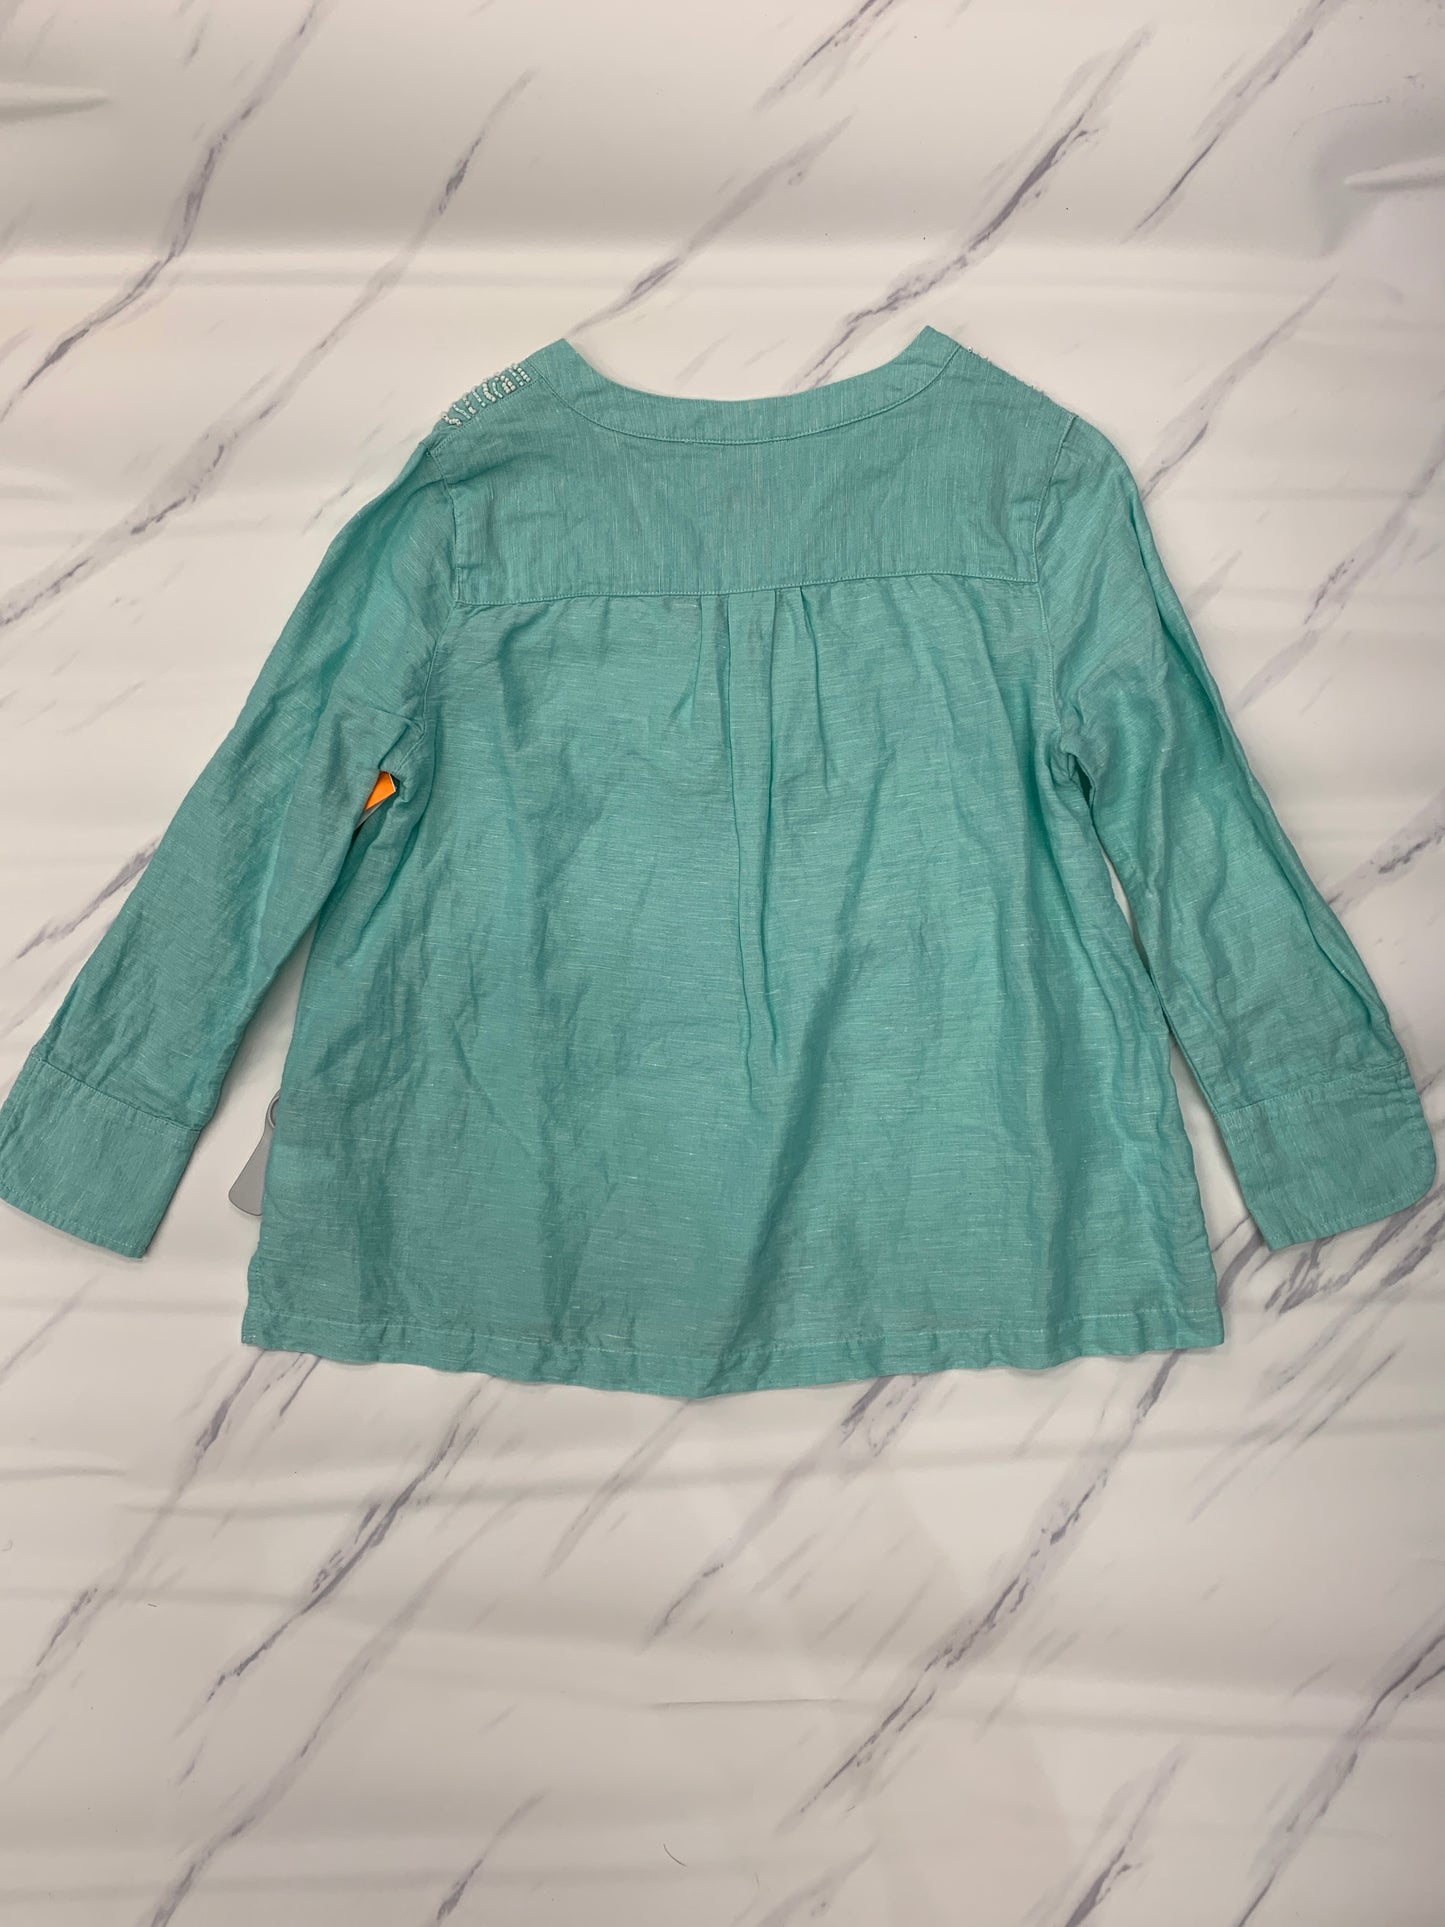 Top 3/4 Sleeve Basic By Vineyard Vines  Size: S